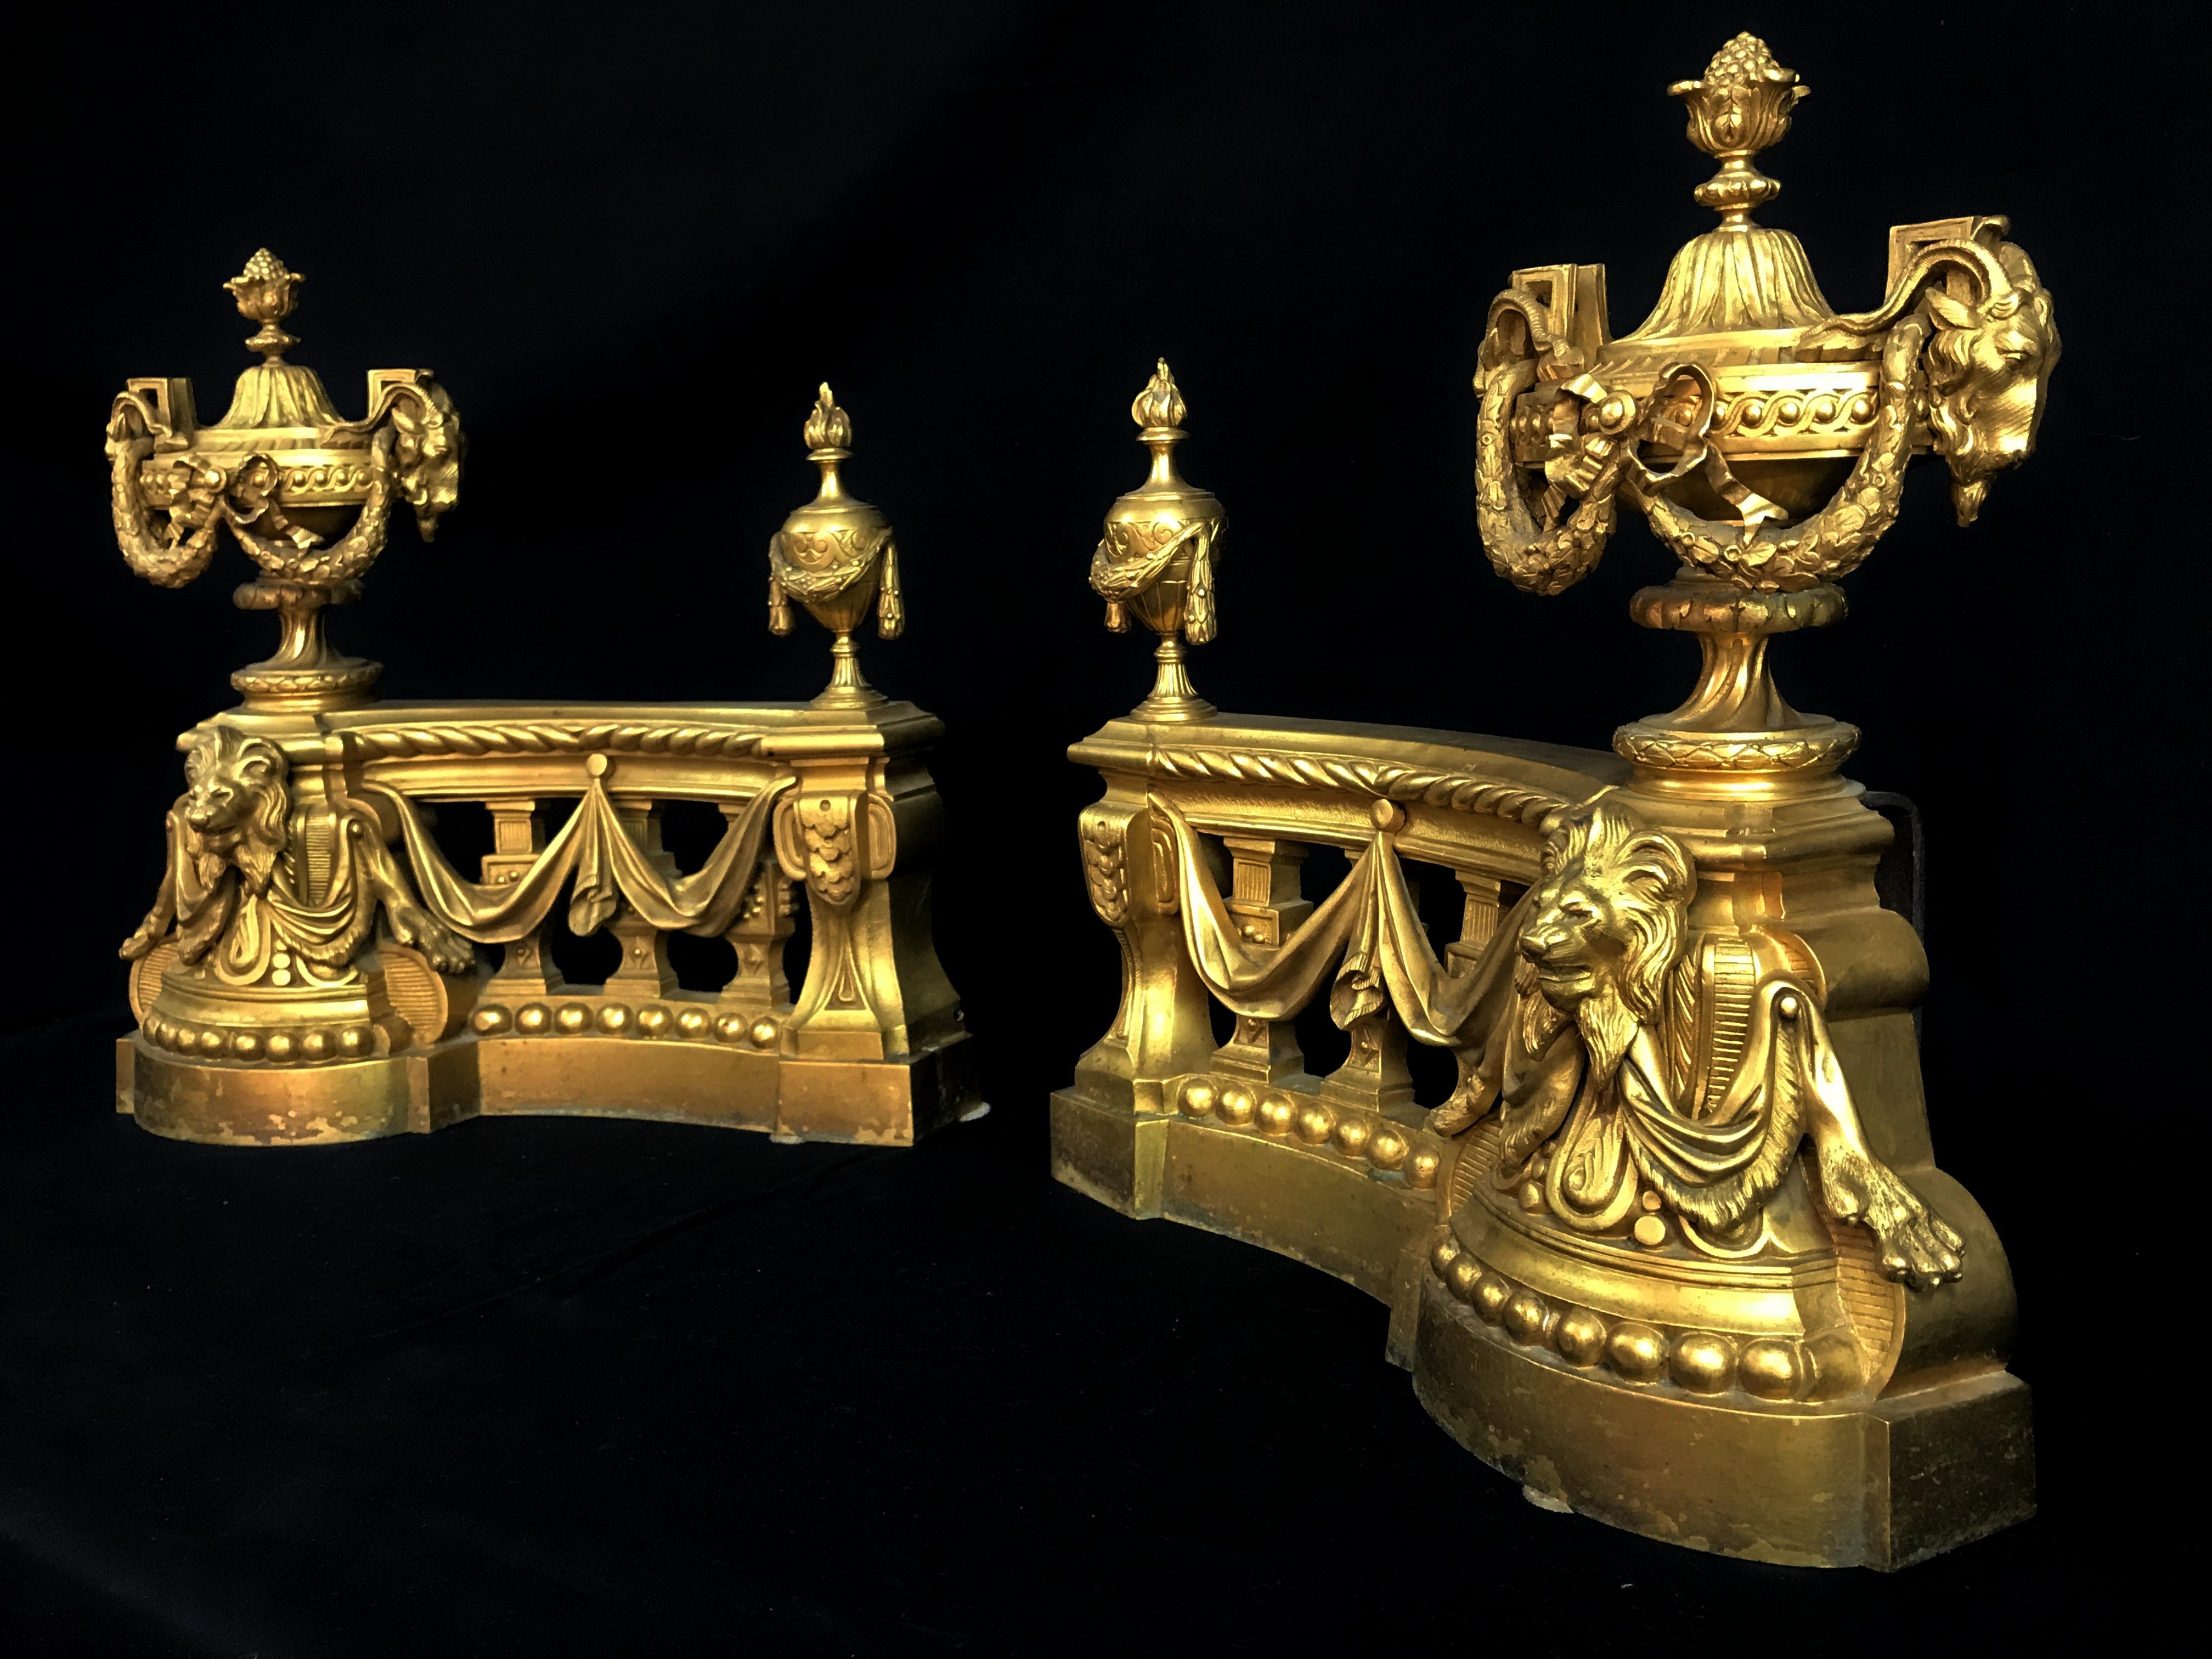 A pair of large sized Chenet, fine-chiselled gilded bronze, Louis XVI style, 18th century.
   